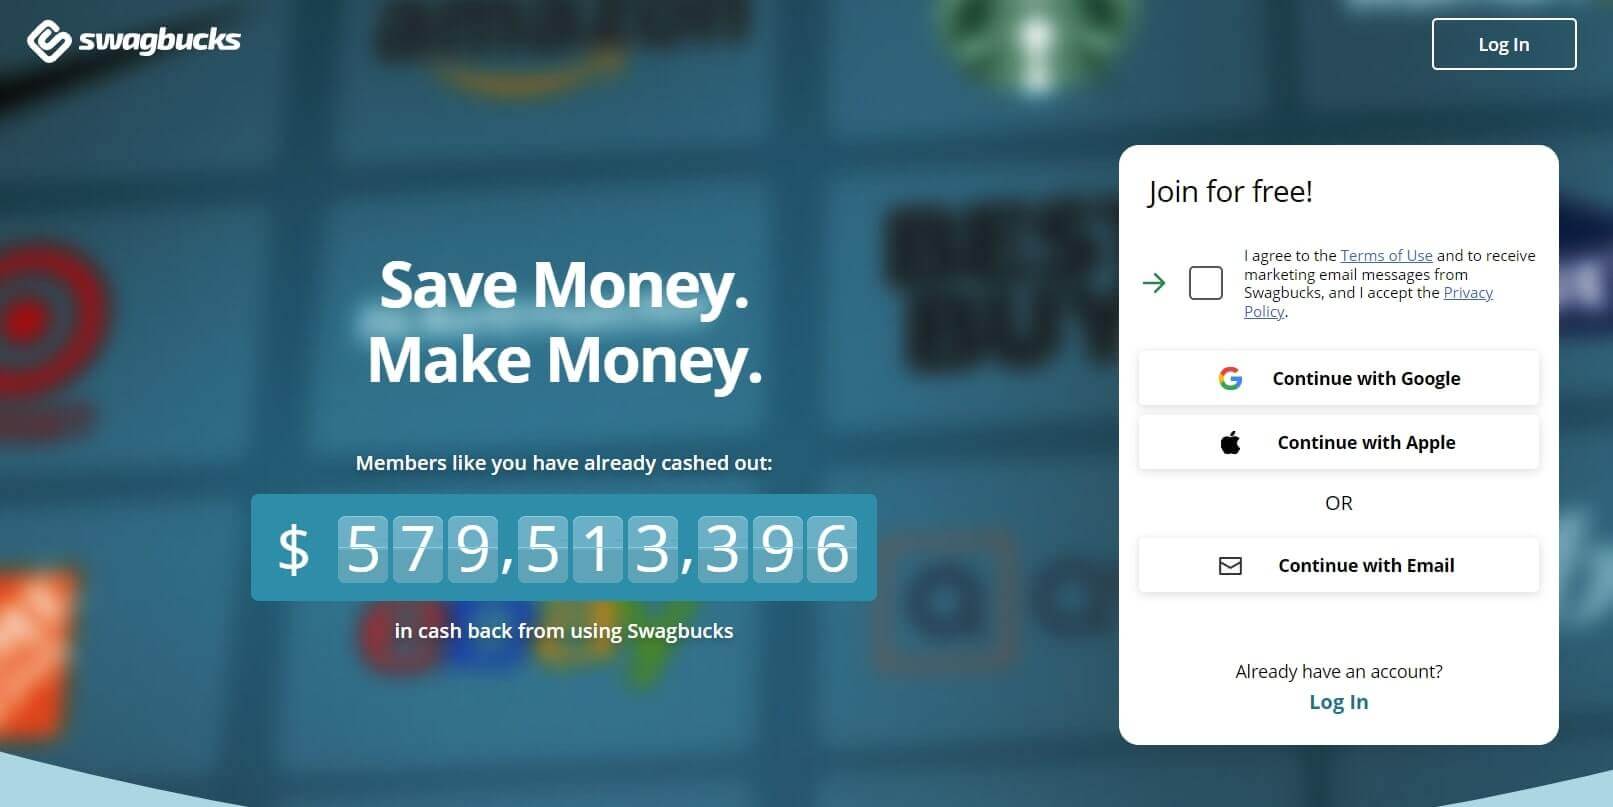 A screenshot of the Swagbucks website encouraging visitors to join in for free.